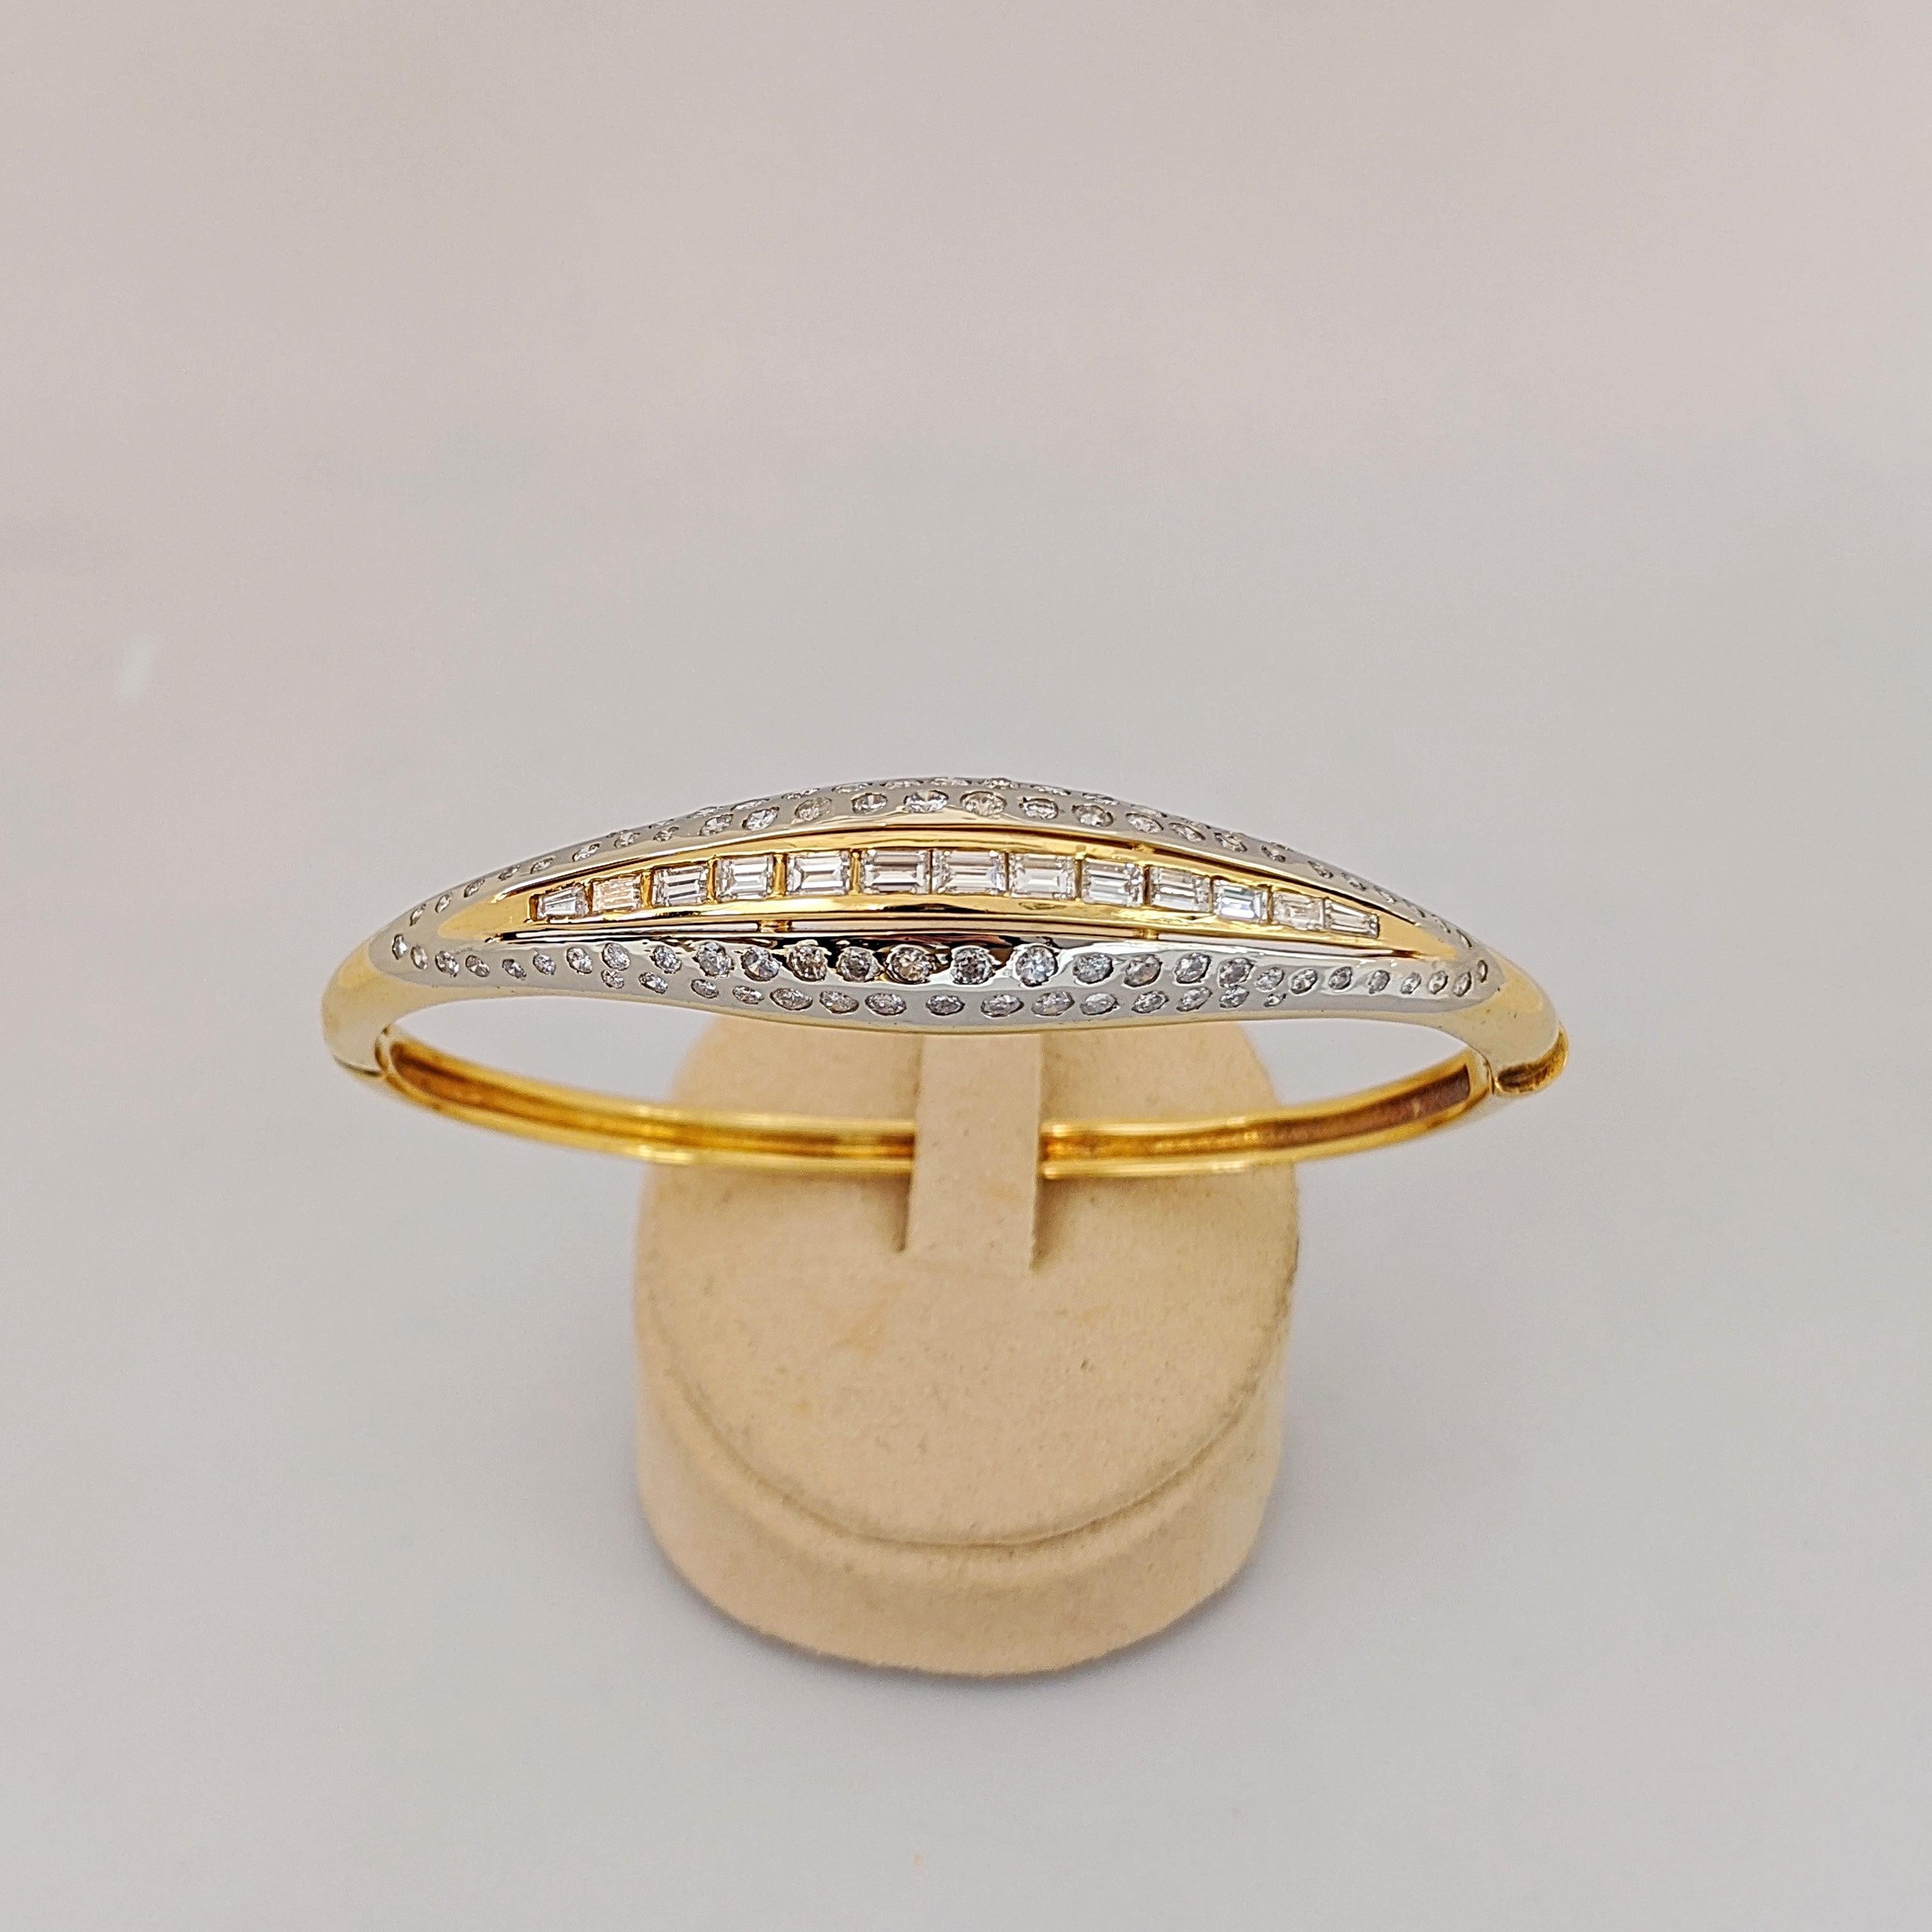 Women's or Men's 18 KT YG/WG Bangle Bracelet with 3.40 Carat Round and Baguette Diamonds For Sale